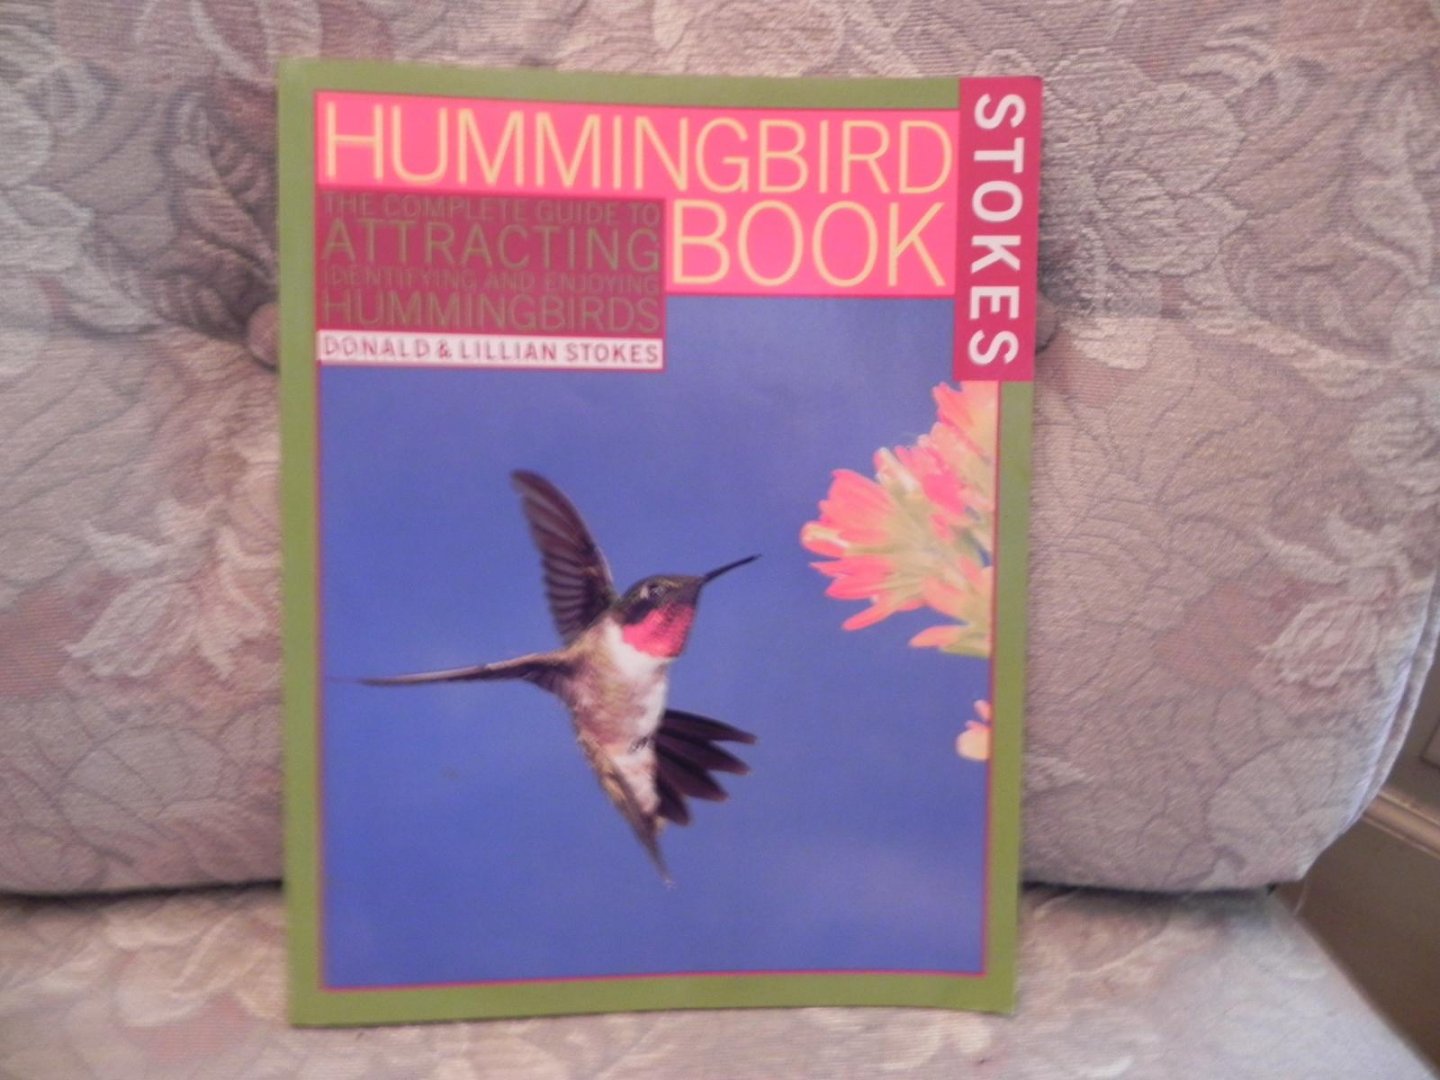 Stokes, Donald, Stokes, Lillian - Hummingbird Book / The Complete Guide to Attracting, Identifying, and Enjoying Hummingbirds